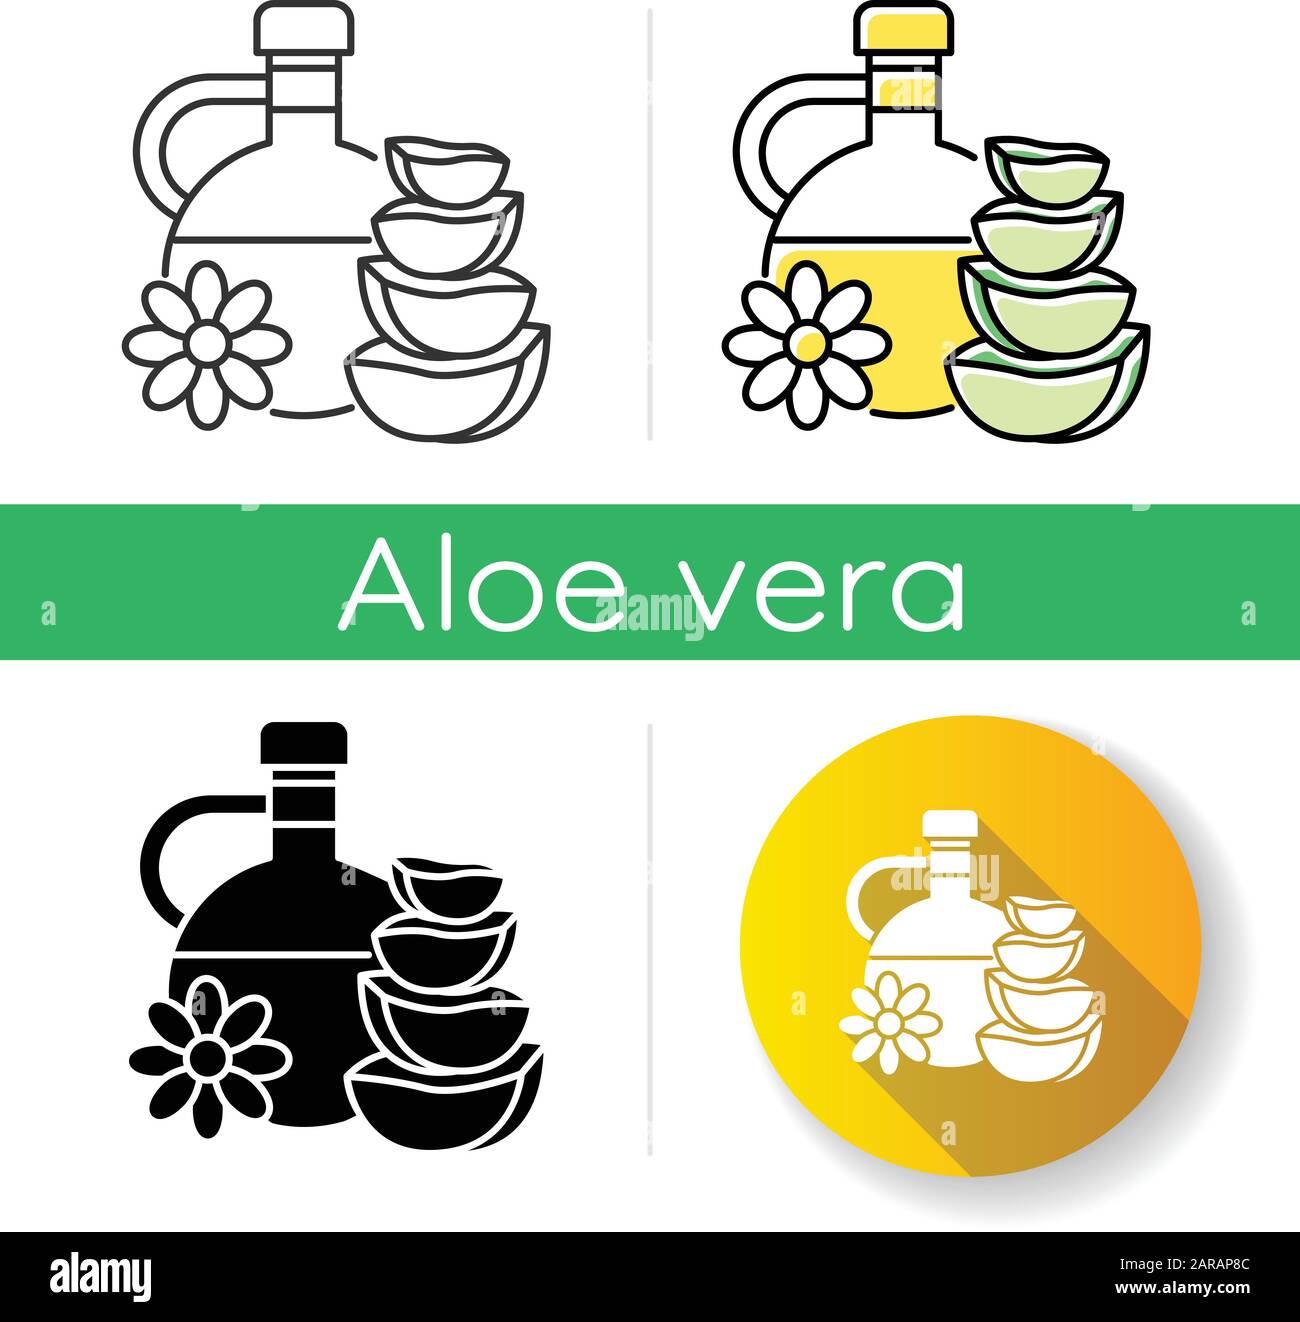 Natural oil icon. Plant based essence. Floral liquid for skincare. Aloe vera. Medicinal herbs extract. Moisturizing and exfoliating. Linear black and Stock Vector